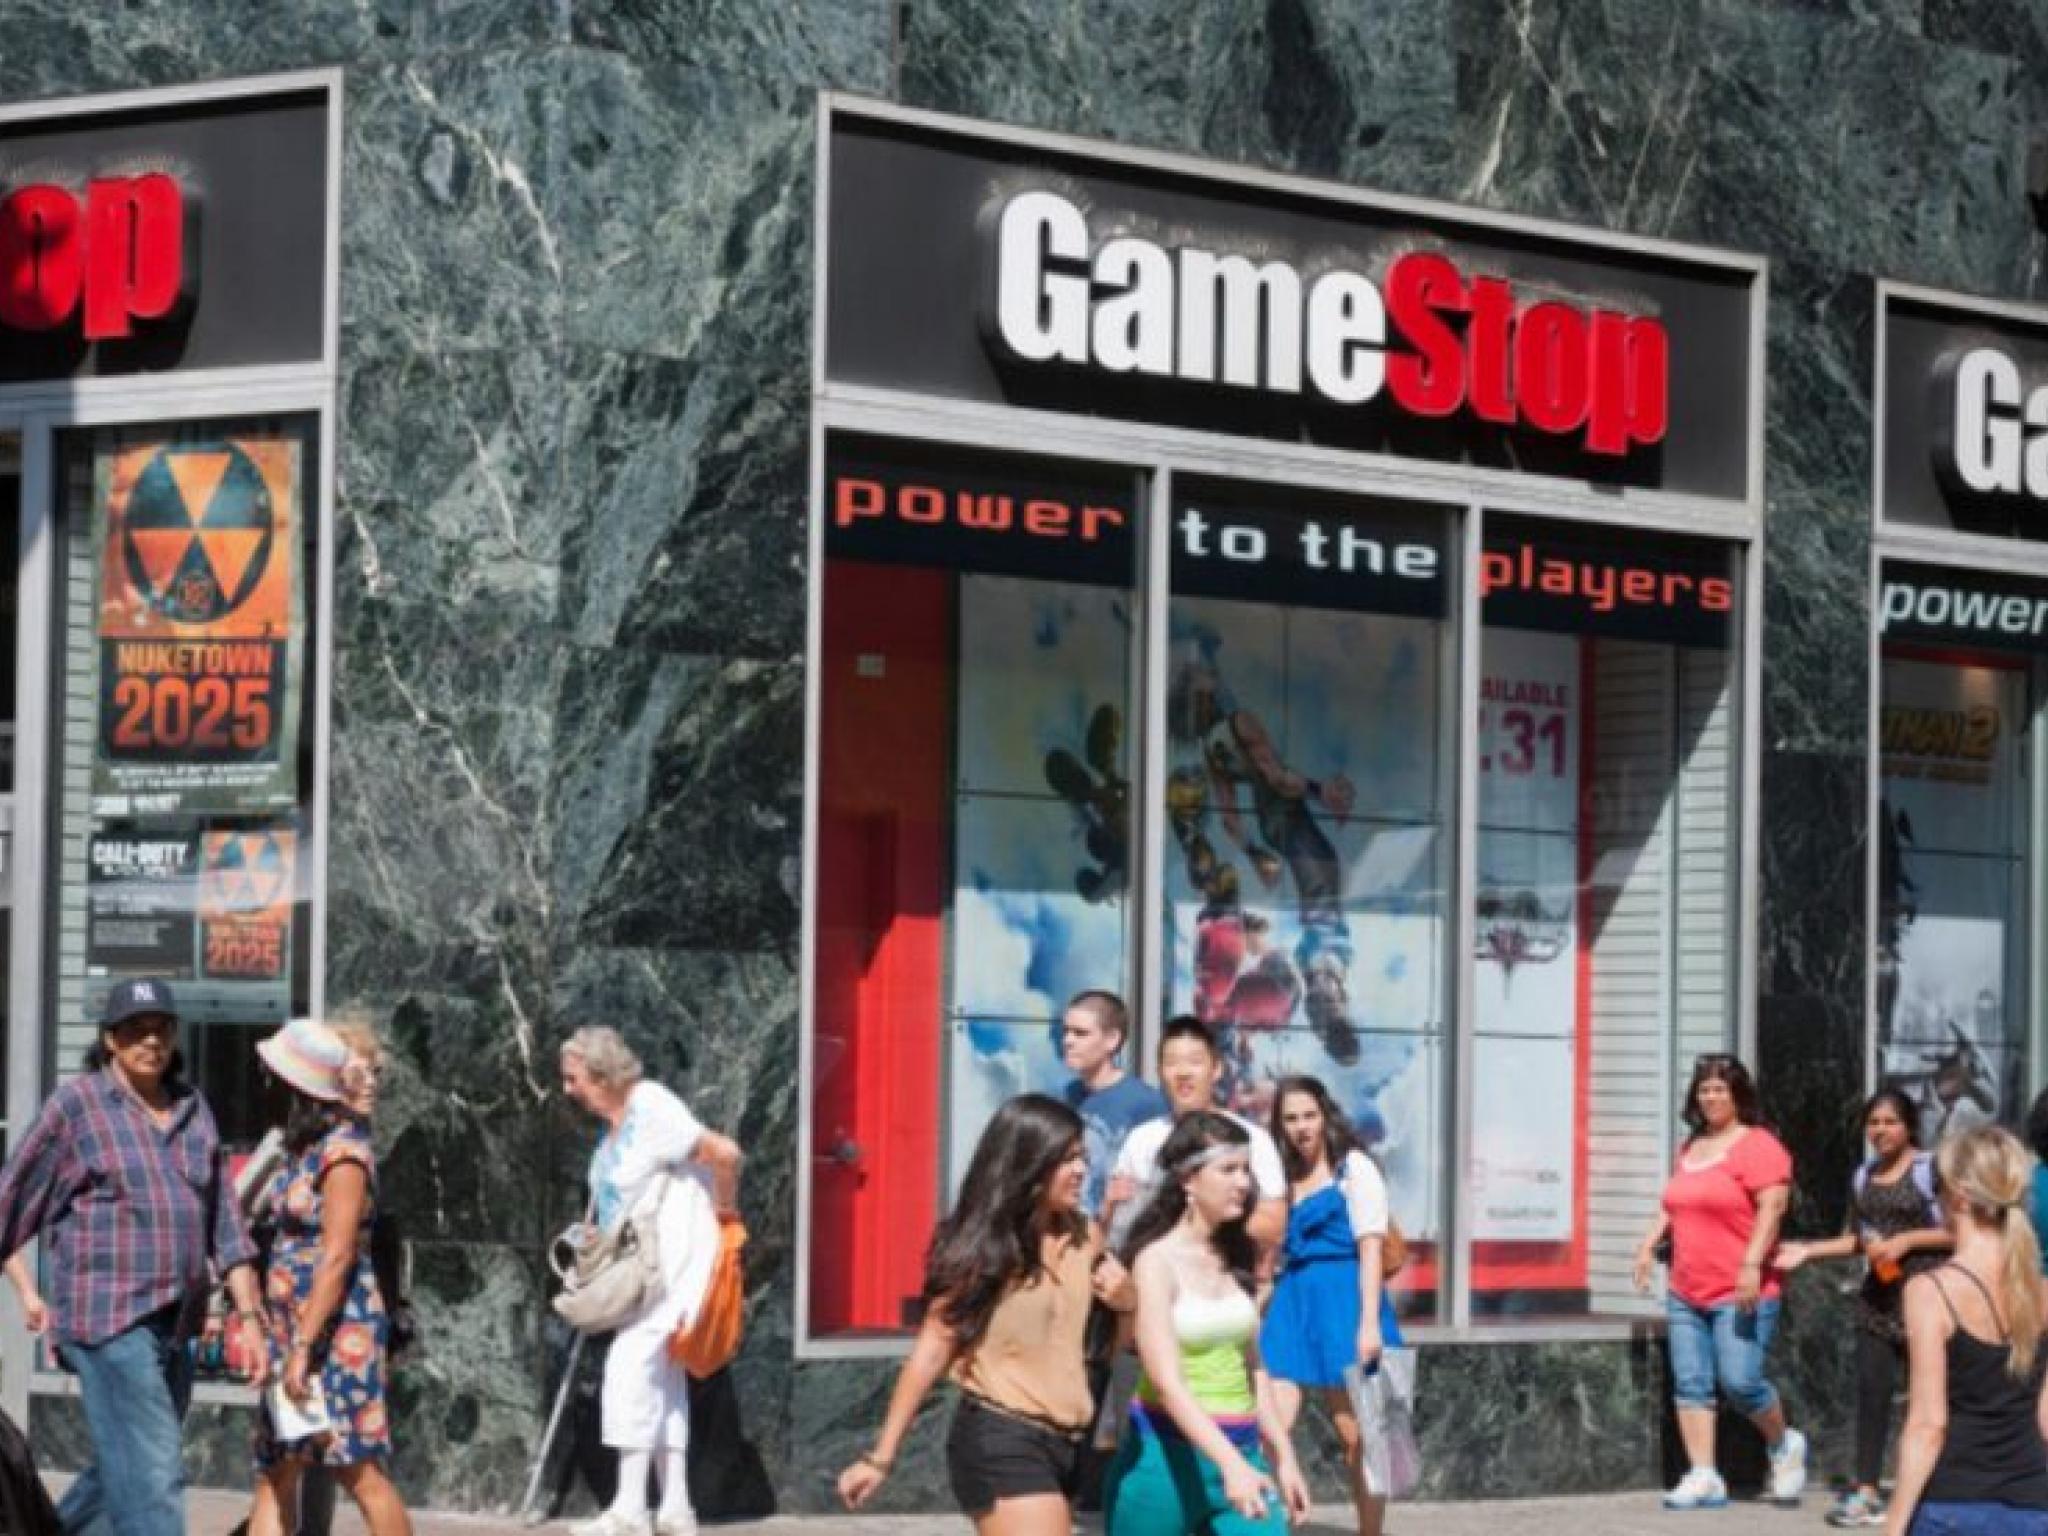  gamestop-rally-returns-after-share-offering-how-will-company-use-1-billion-in-proceeds 